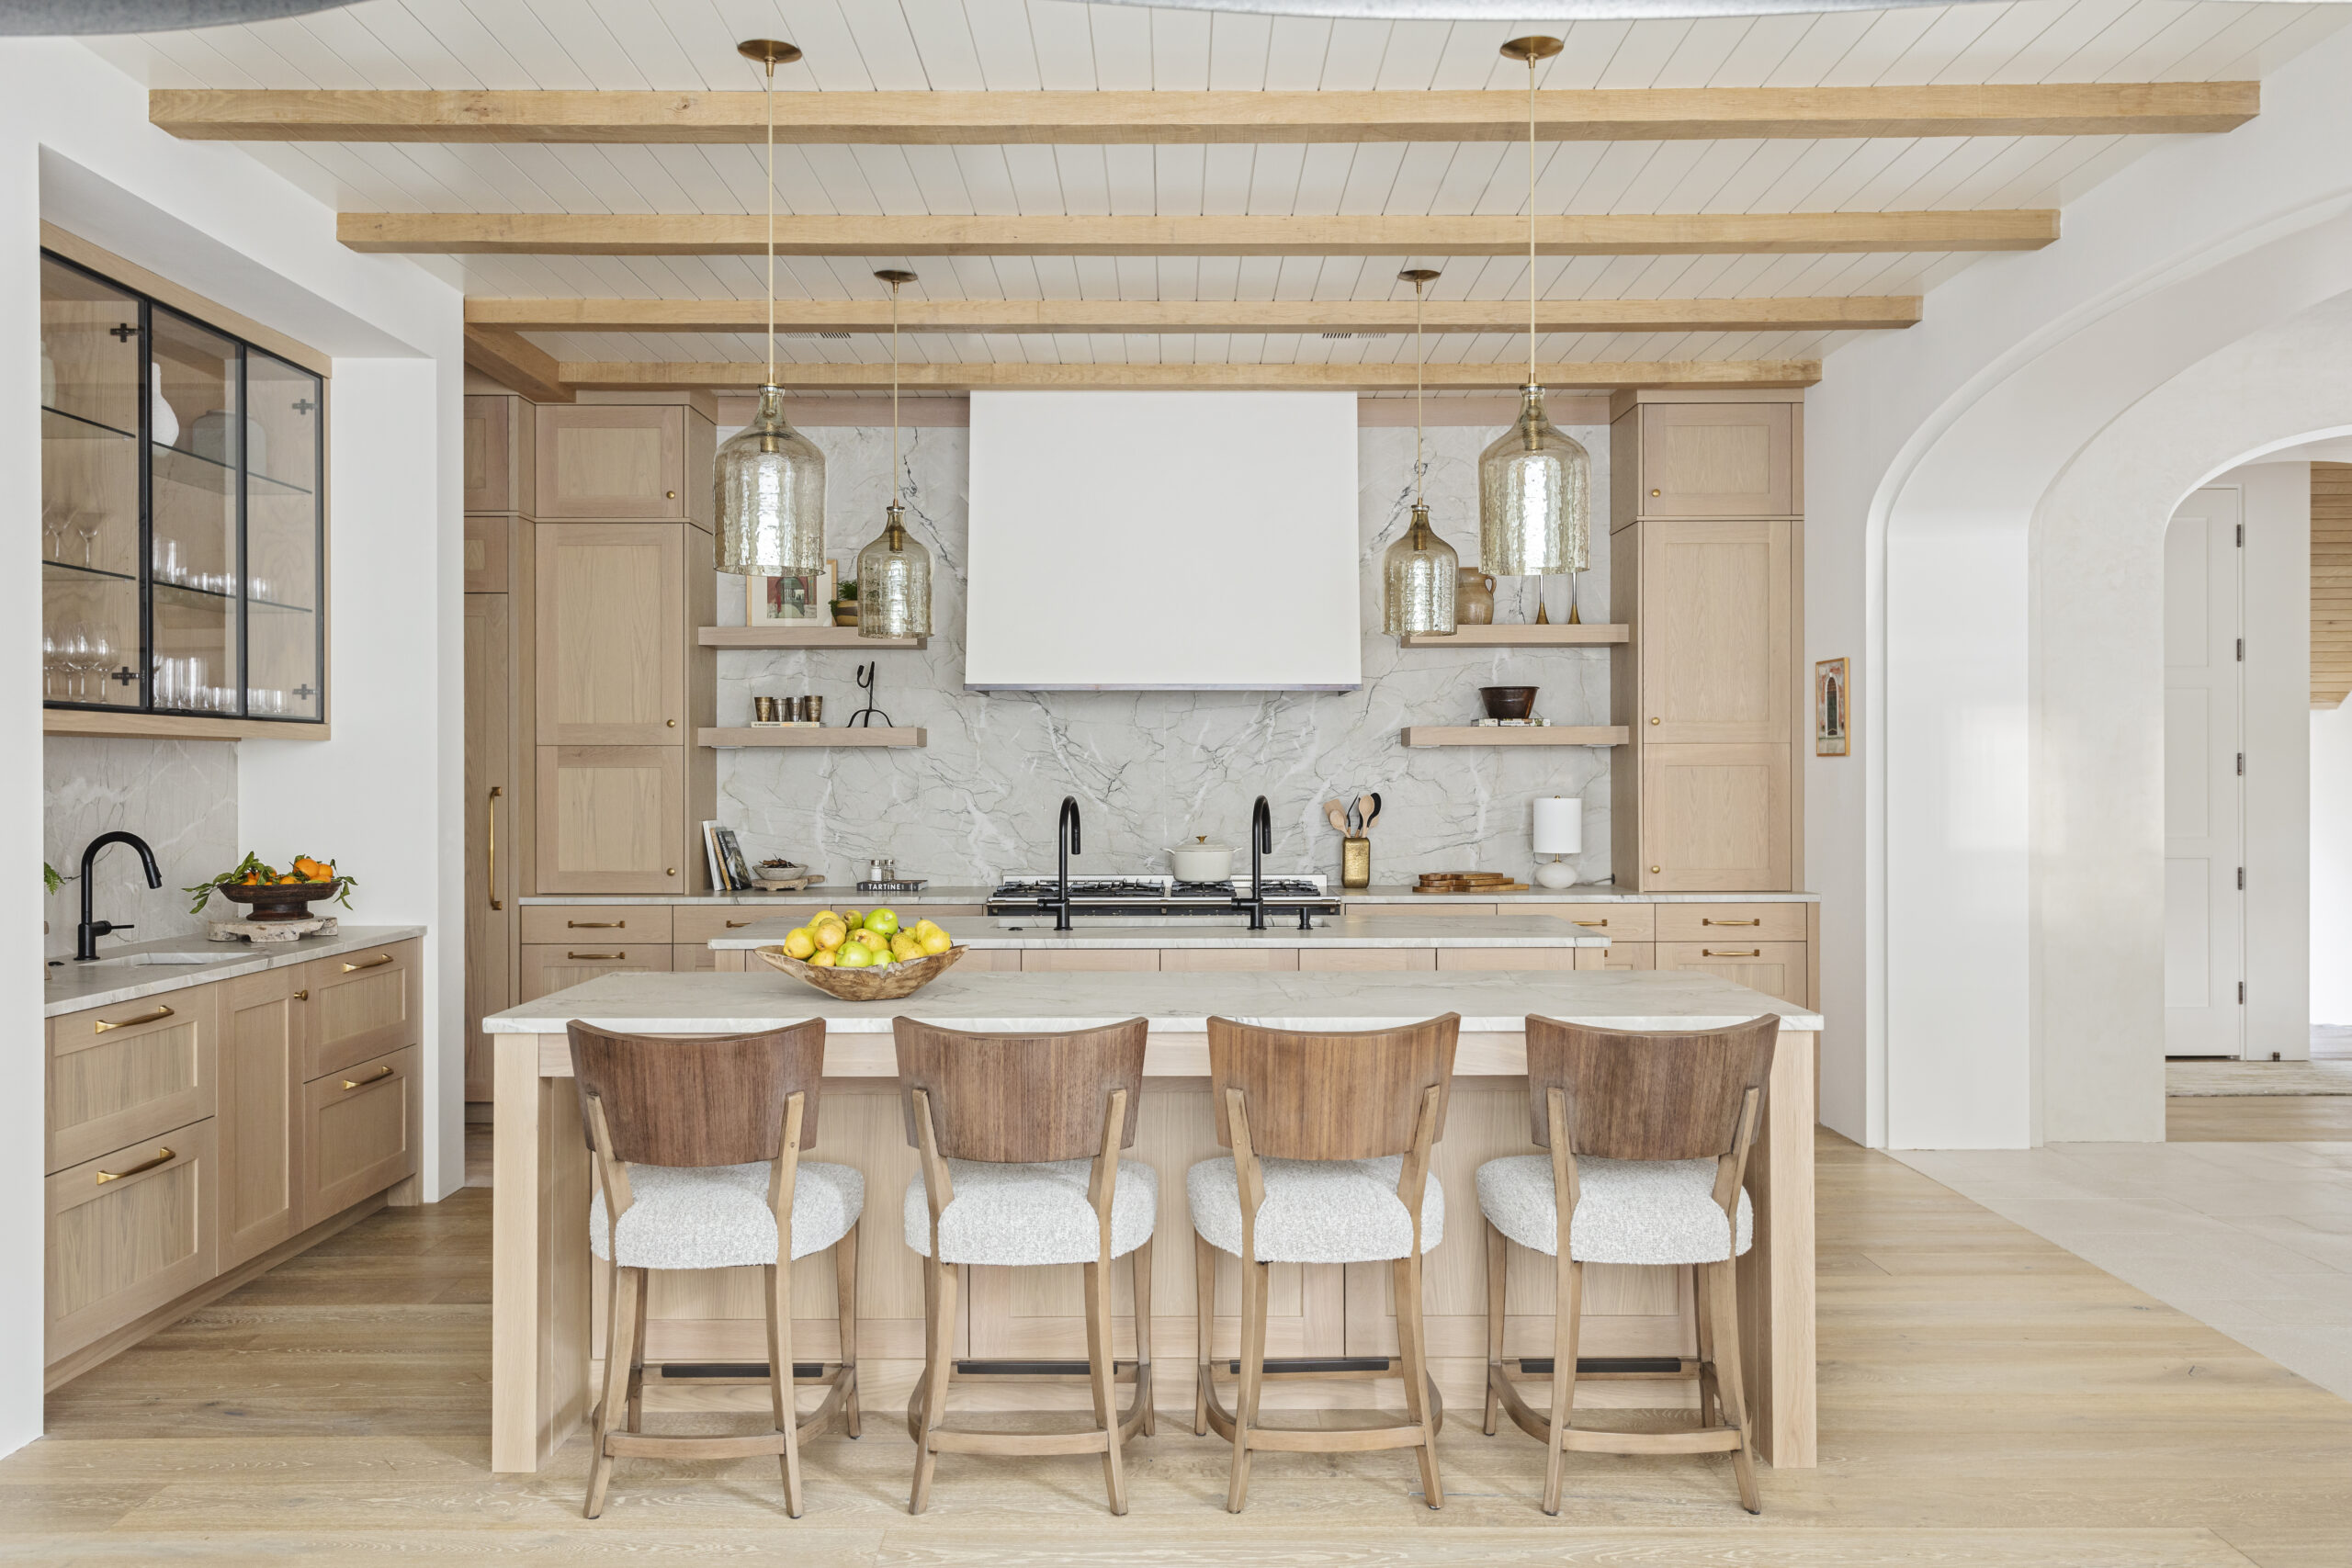 Home tour featuring kitchen with pale blonde wood designed by Margaret Donaldson